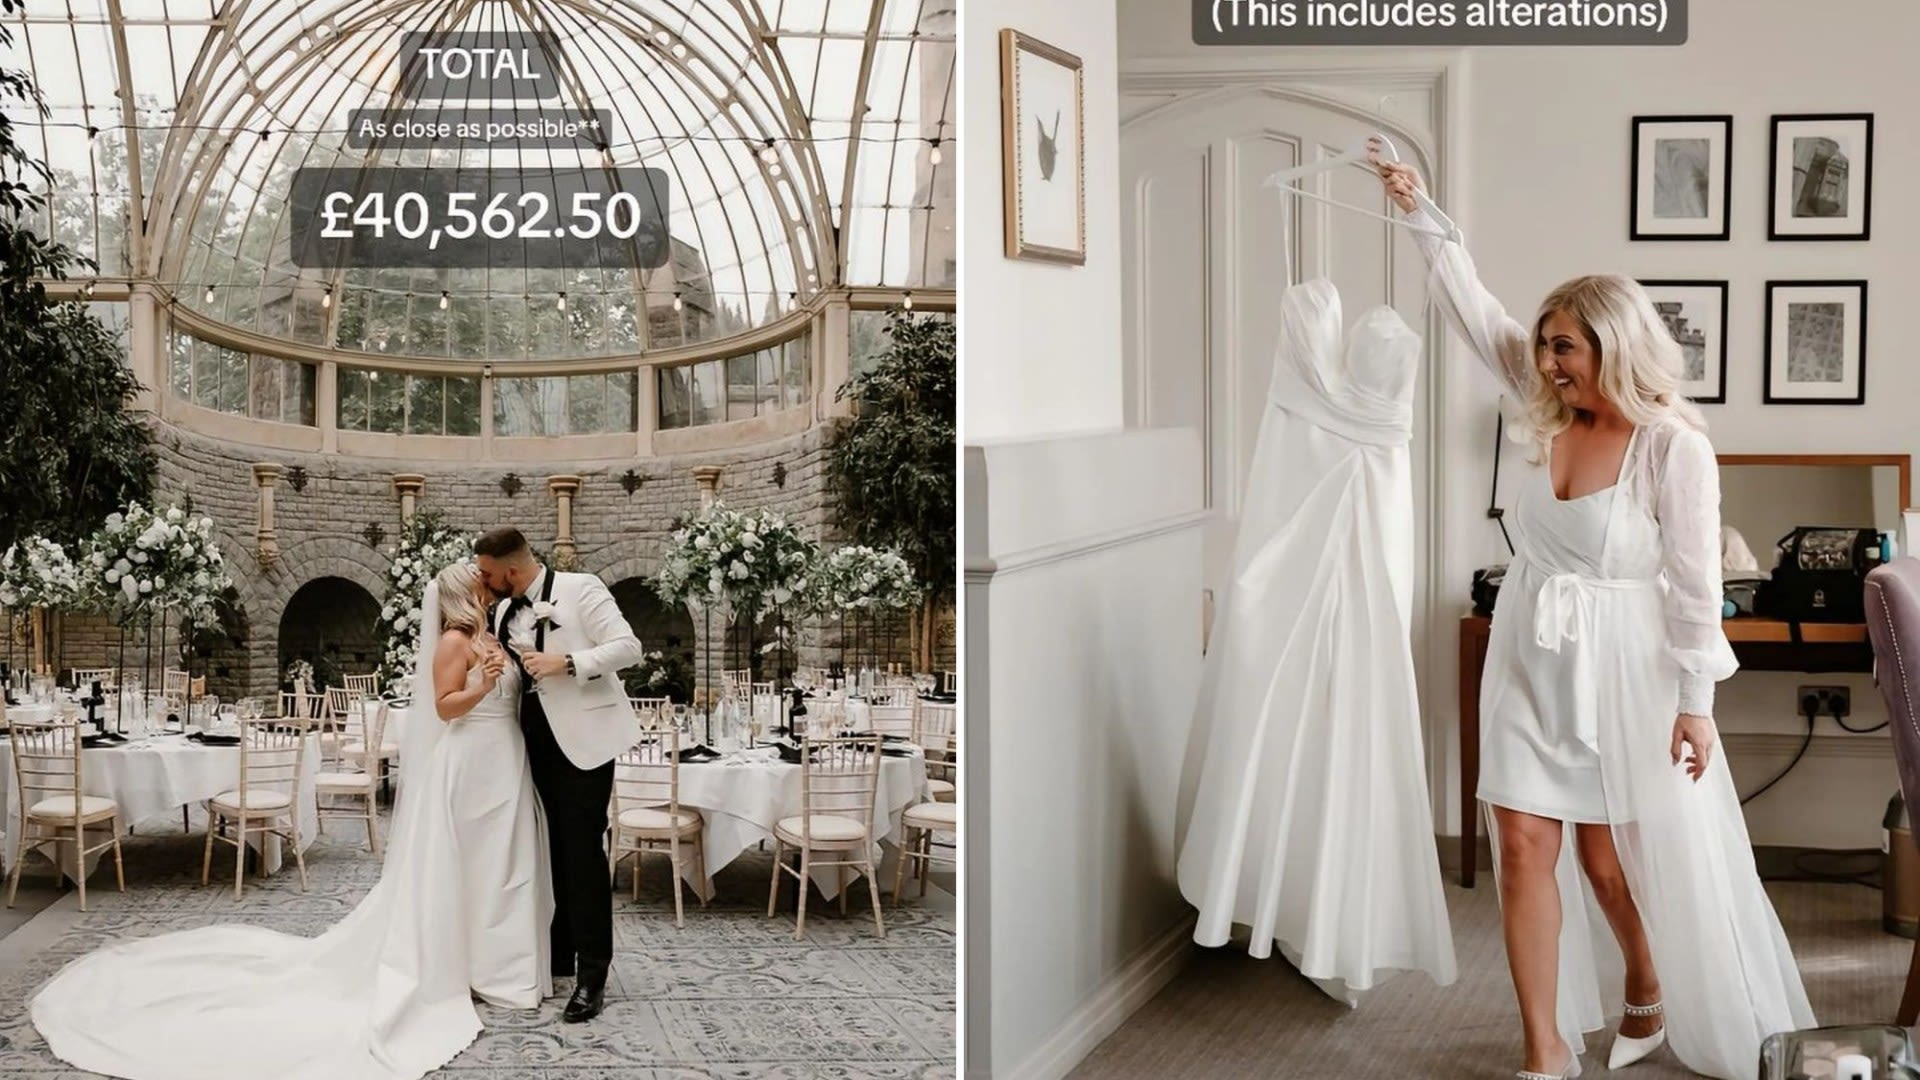 Trolls say I’m ‘insane’ for ‘bragging’ about my £40k wedding - but I worked hard